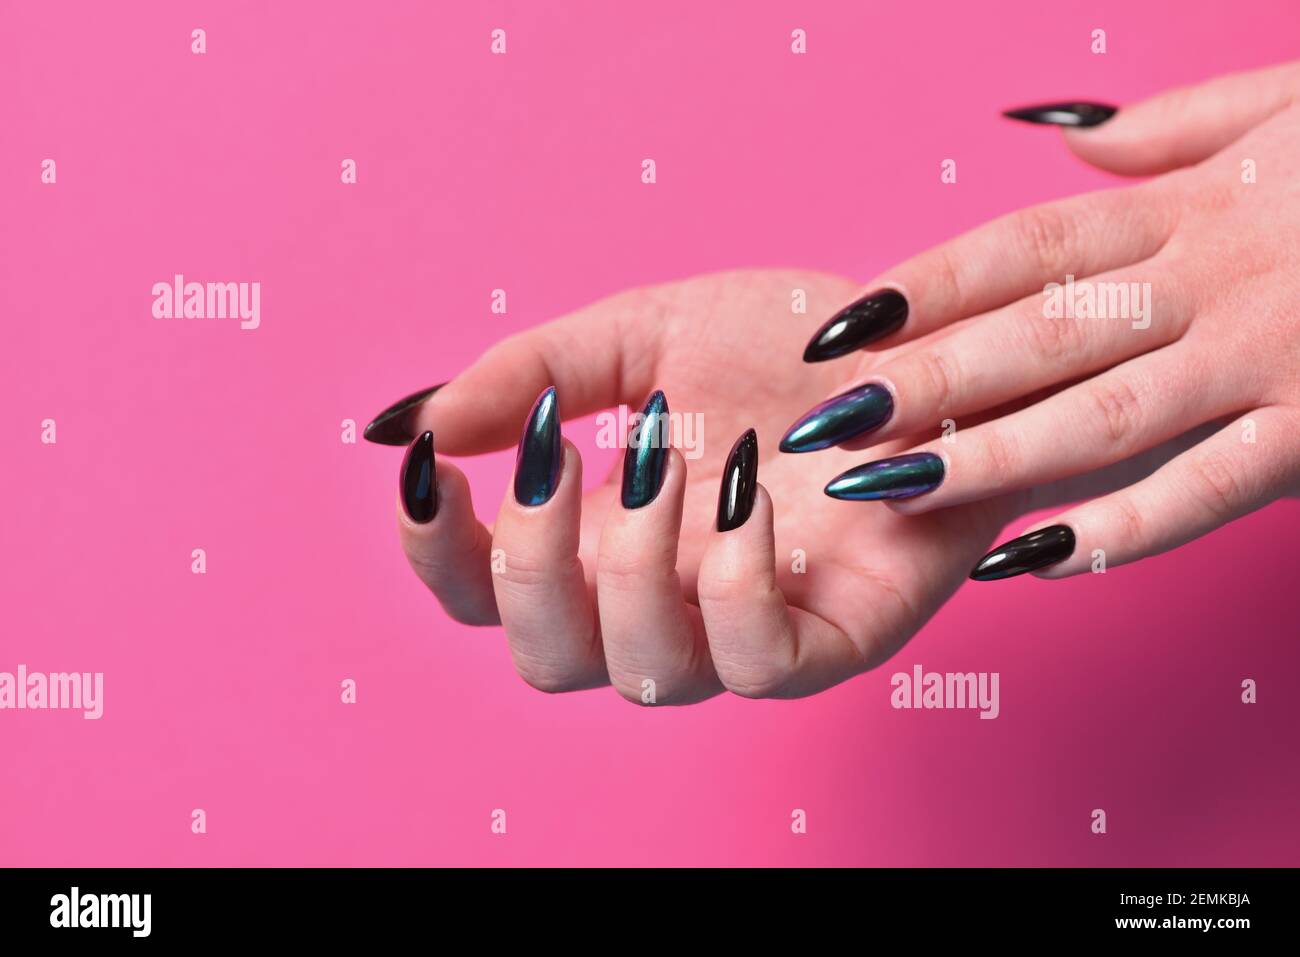 Female hands with new dark manicure on pink background Stock Photo